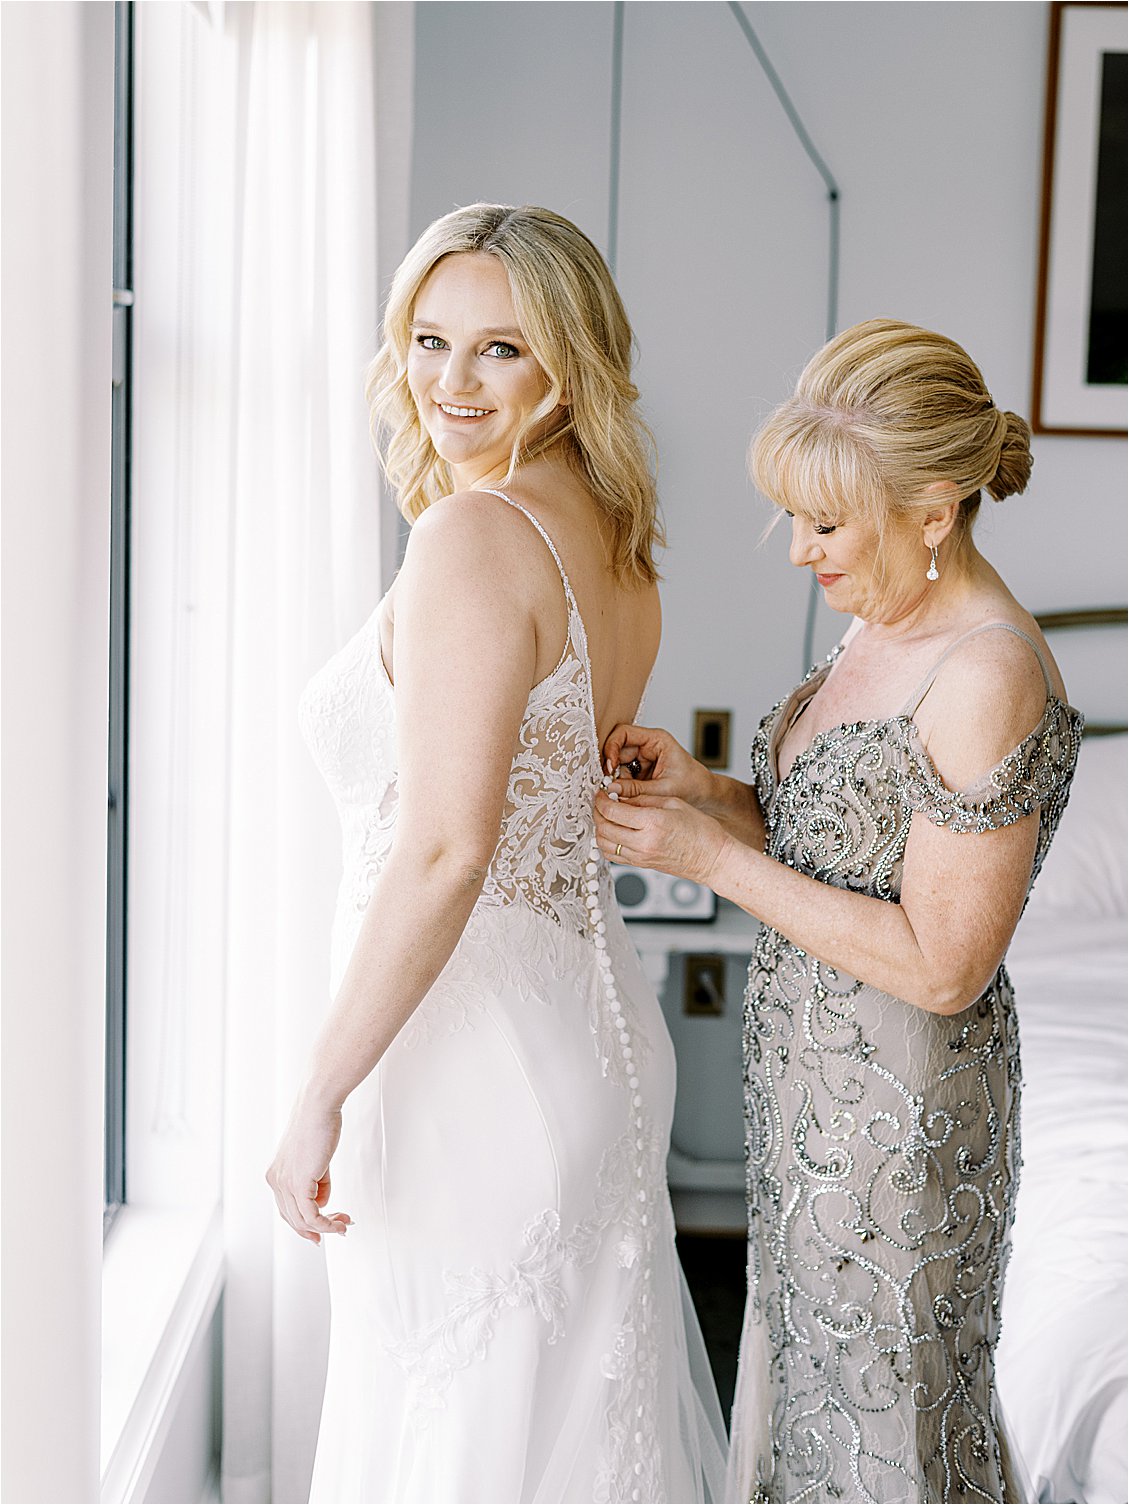 Bride getting ready for her wedding day in a lace Essense of Australia gown